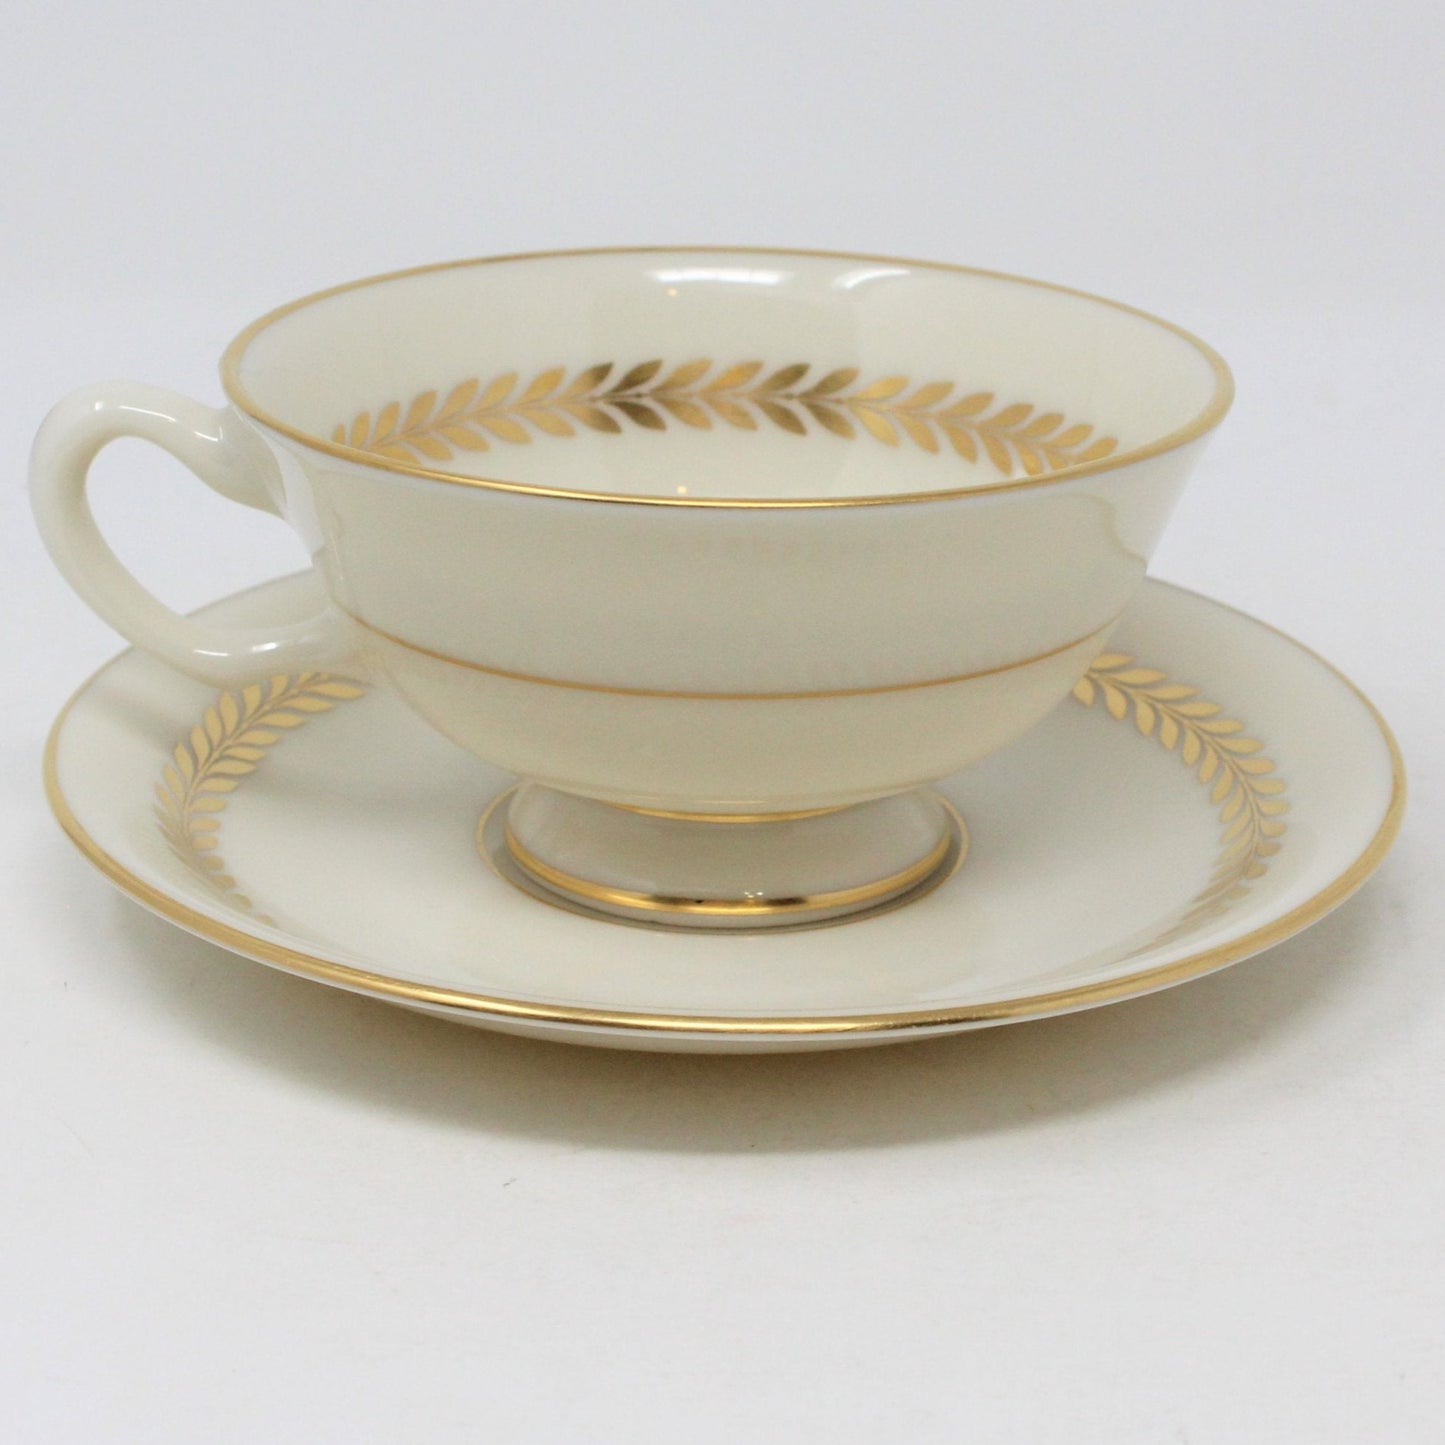 Teacup and Saucer, Lenox, Imperial P-338, USA Vintage